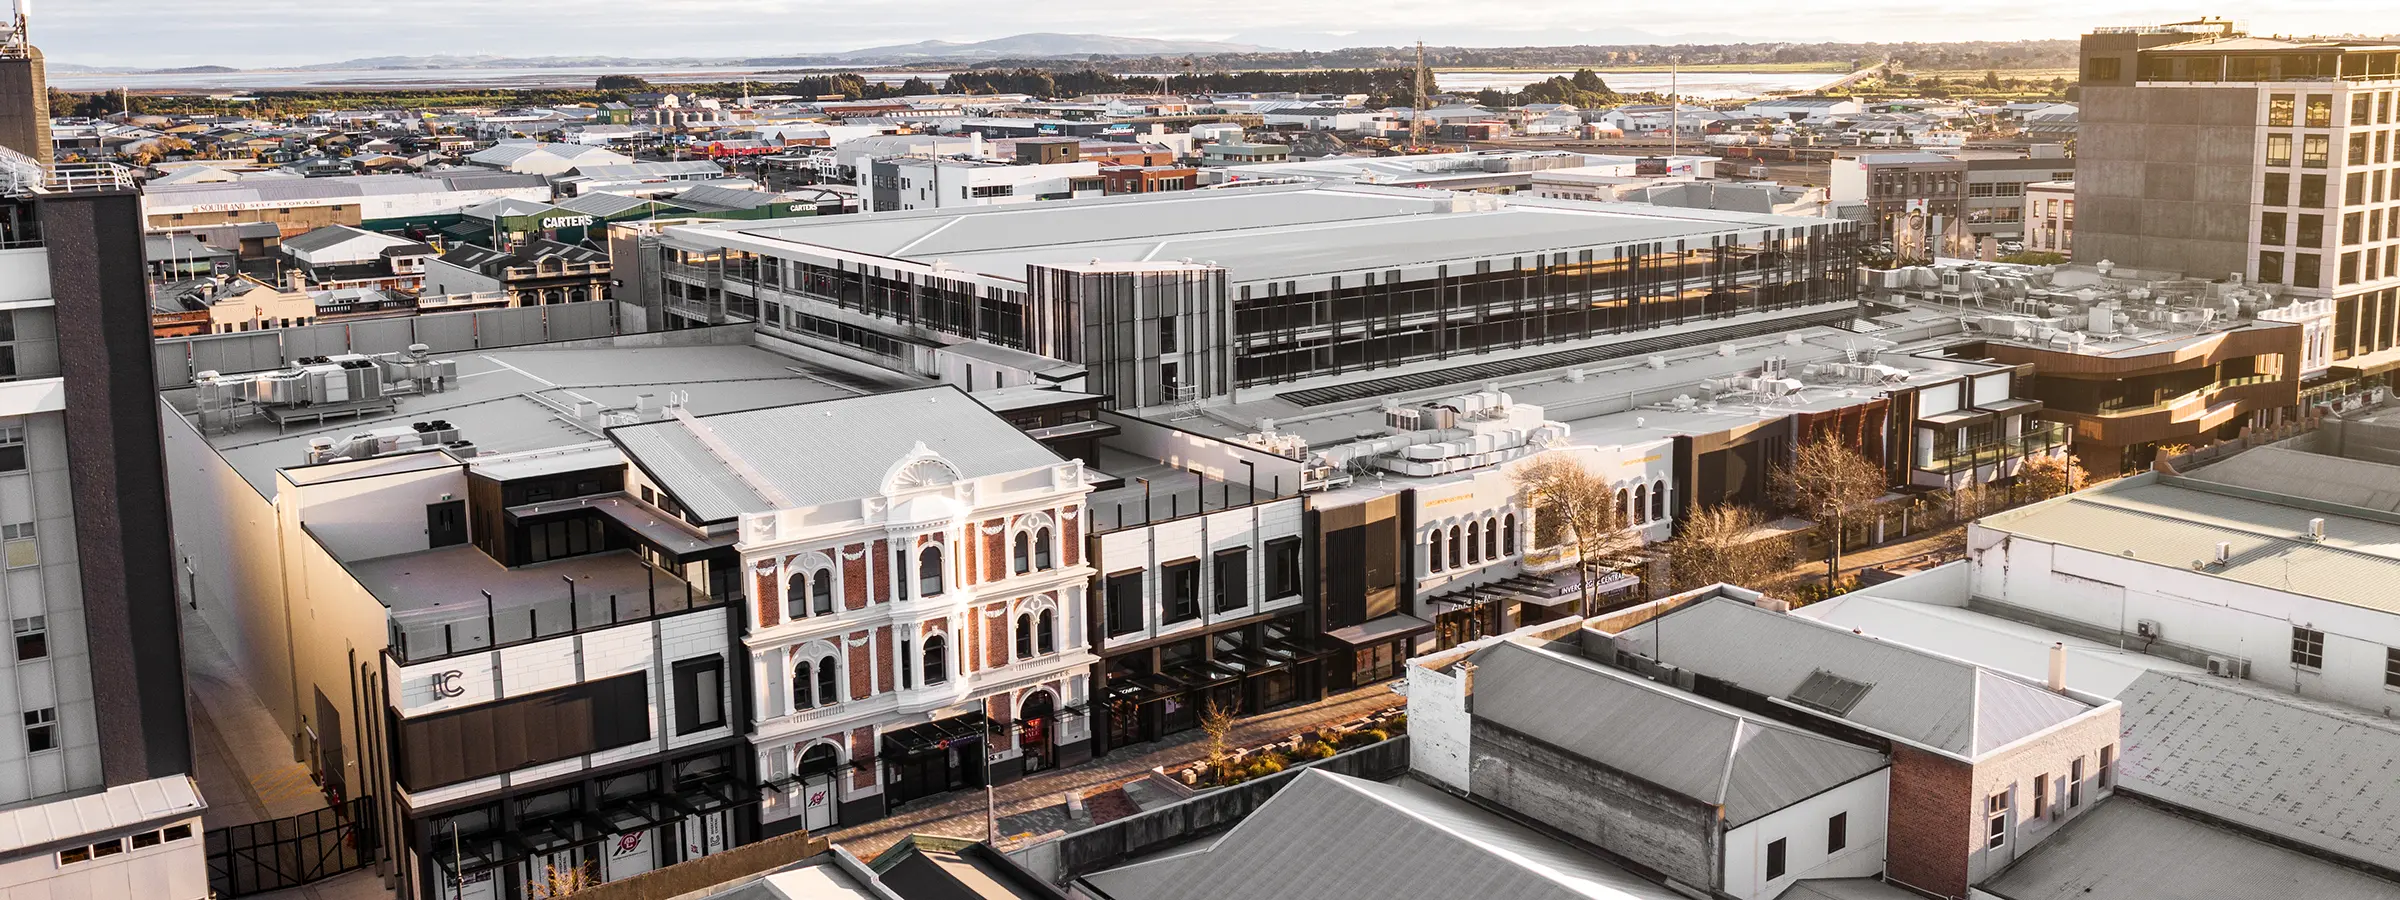 Photo by LightForge - Invercargill Central Business District Project Completed